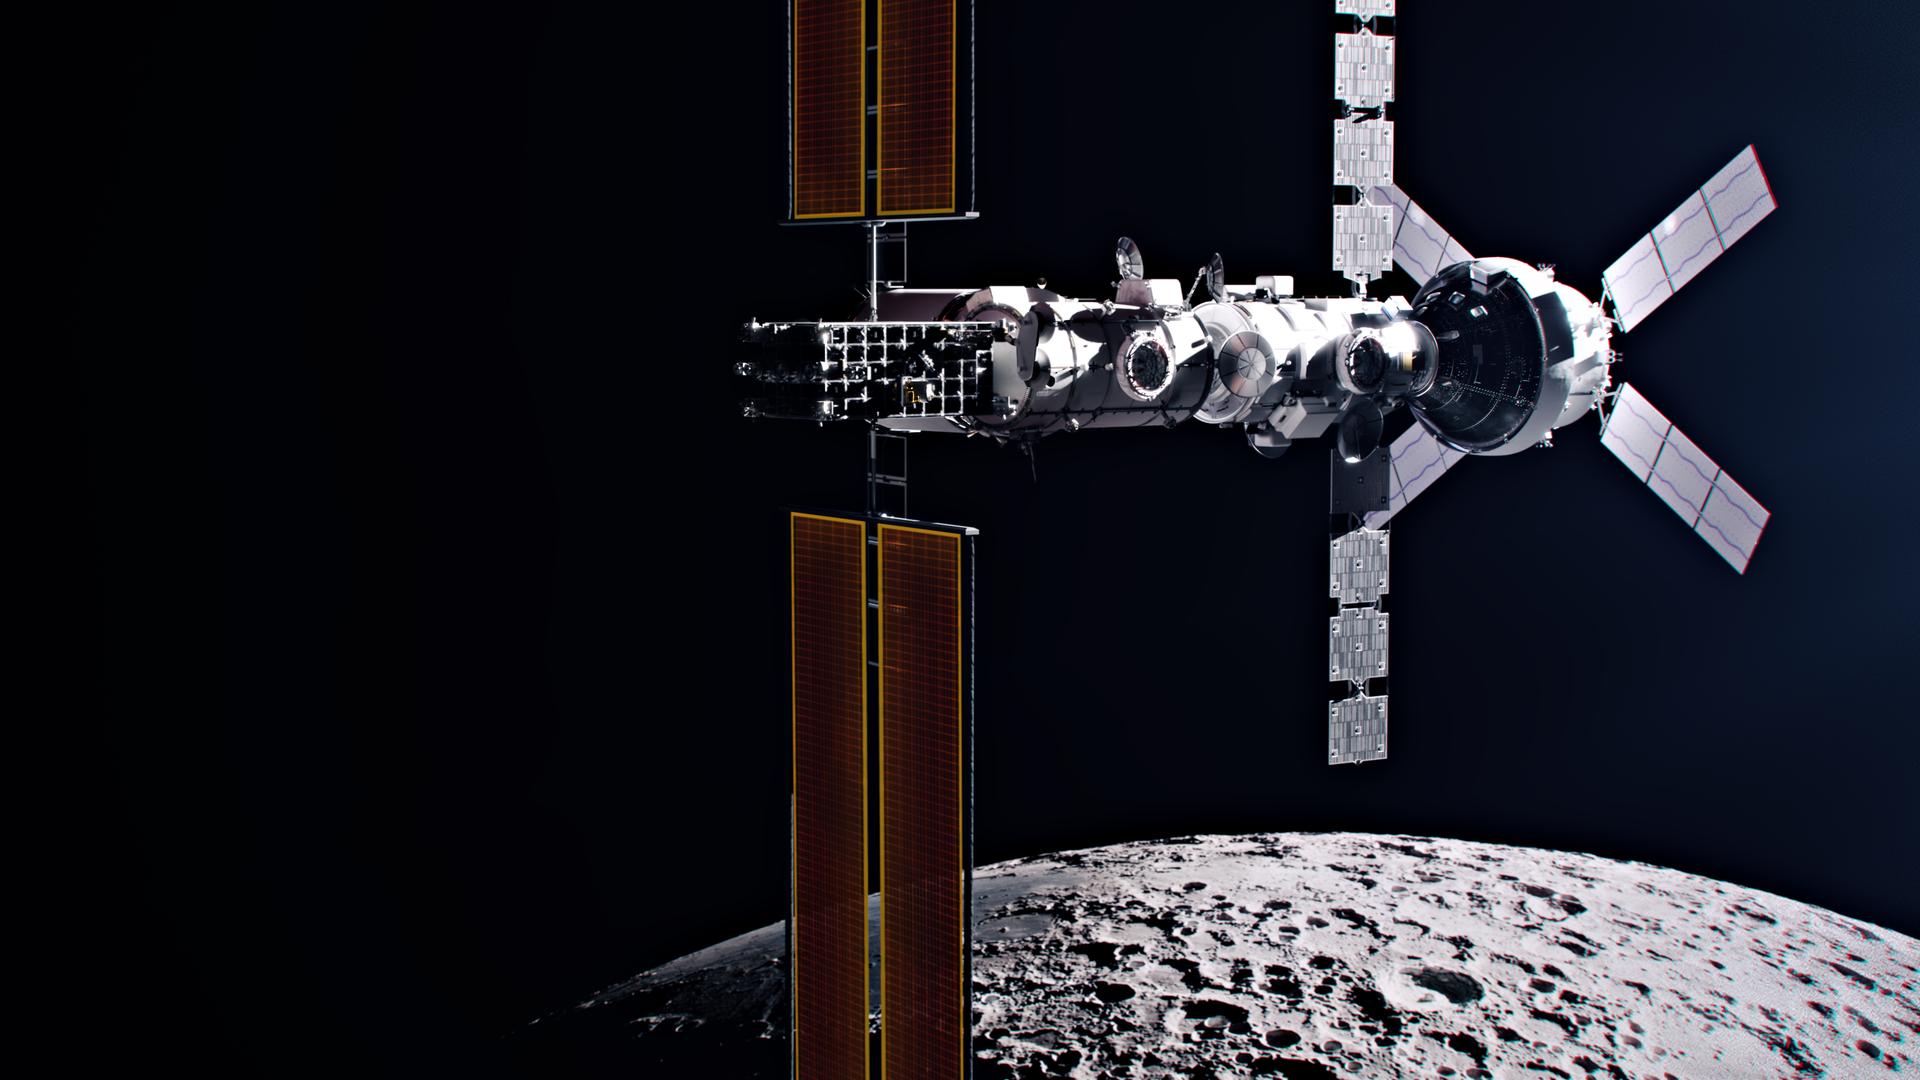 CGI rendering of the Gateway space station hosts the Orion spacecraft and SpaceX's deep space logistics spacecraft in a polar orbit around the Moon, supporting scientific discovery on the lunar surface during the Artemis IV mission.